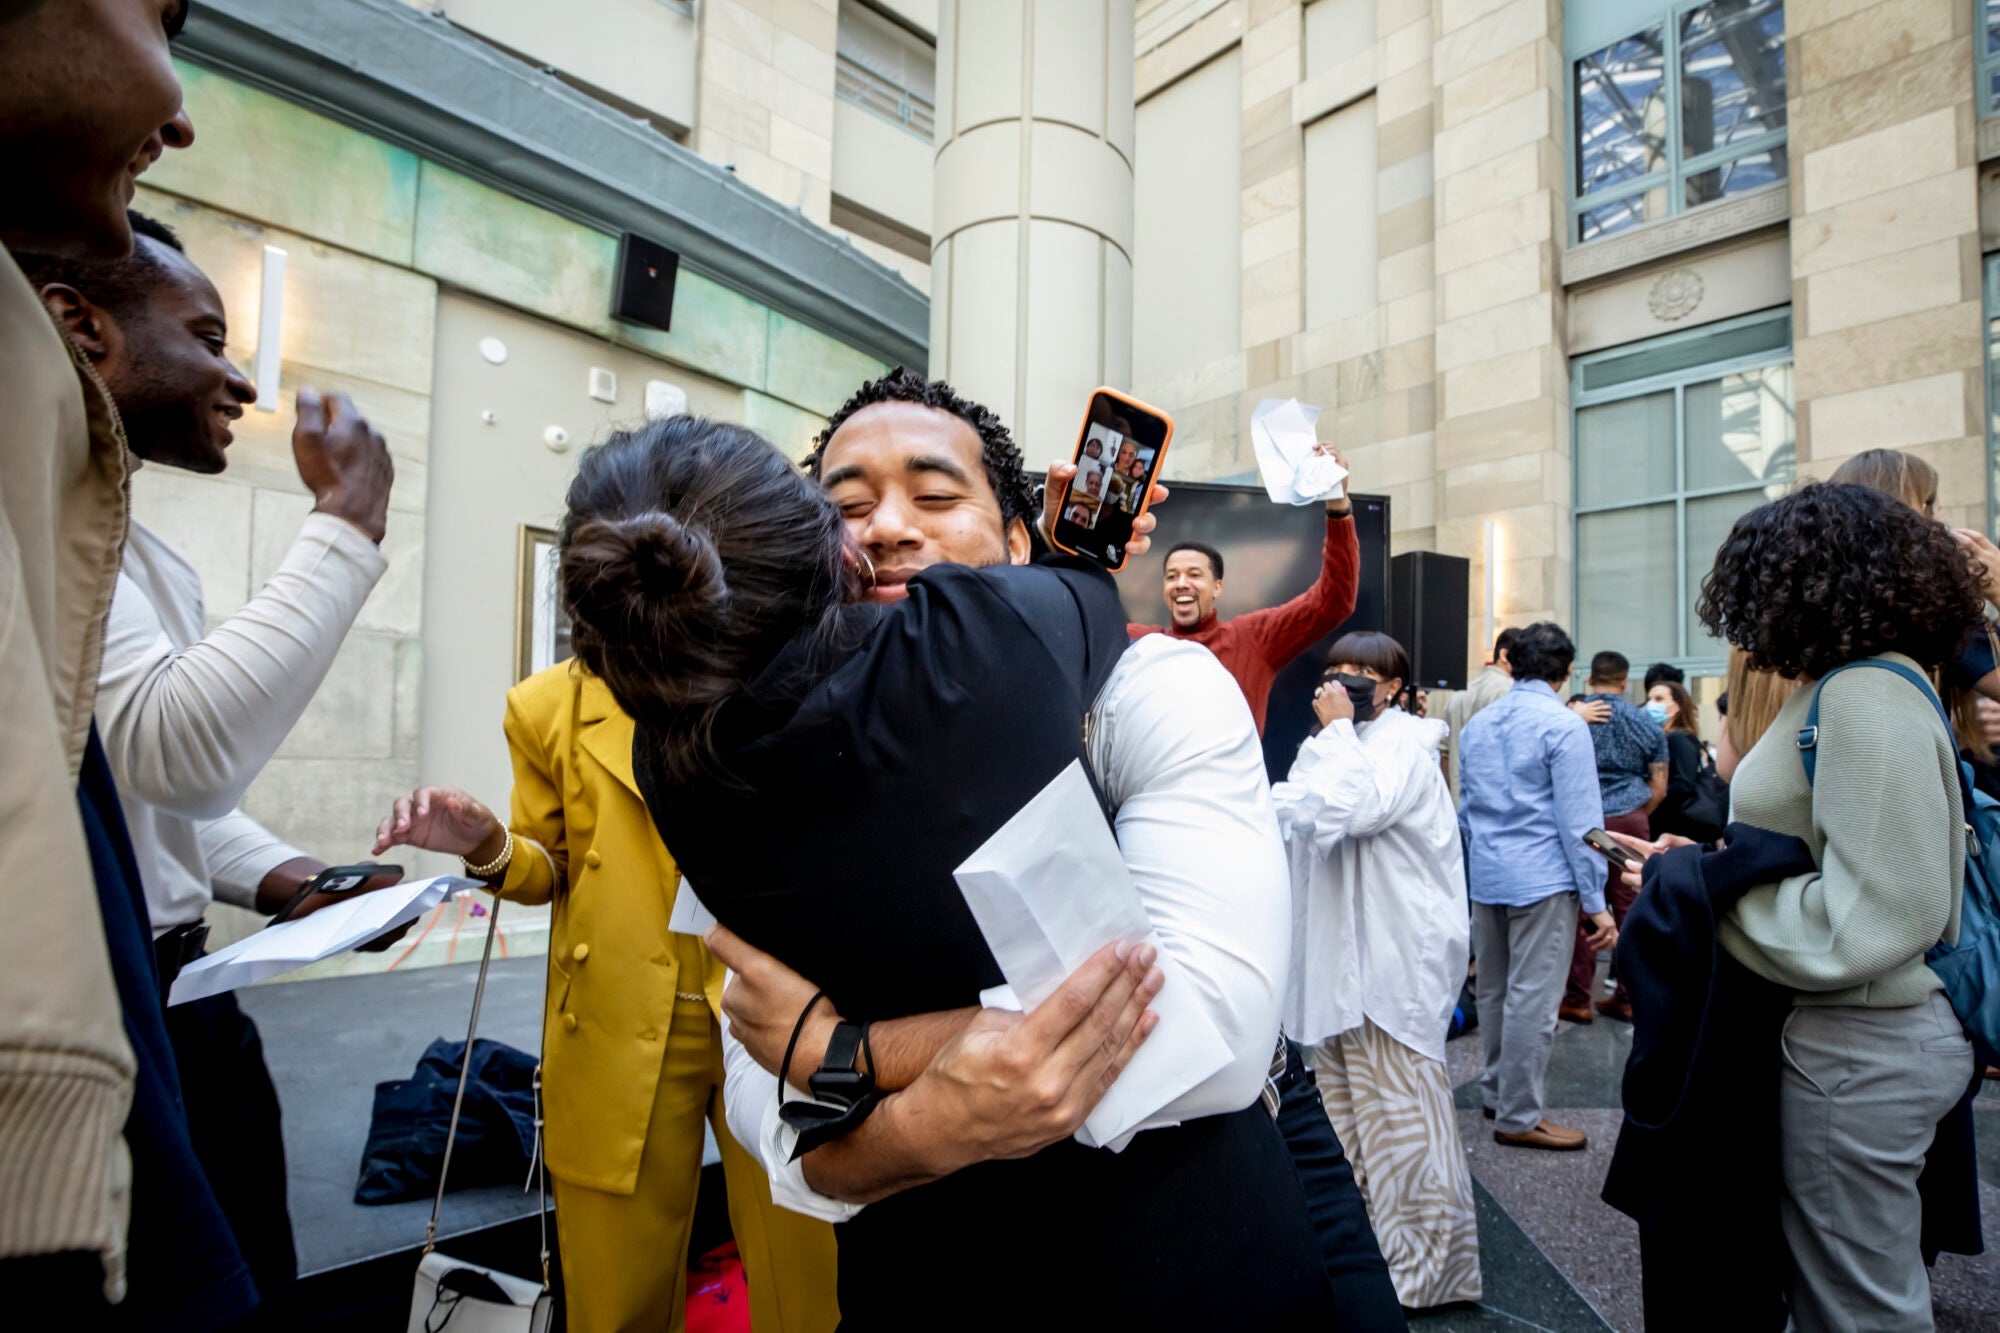 Two students hug while others celebrate in the background